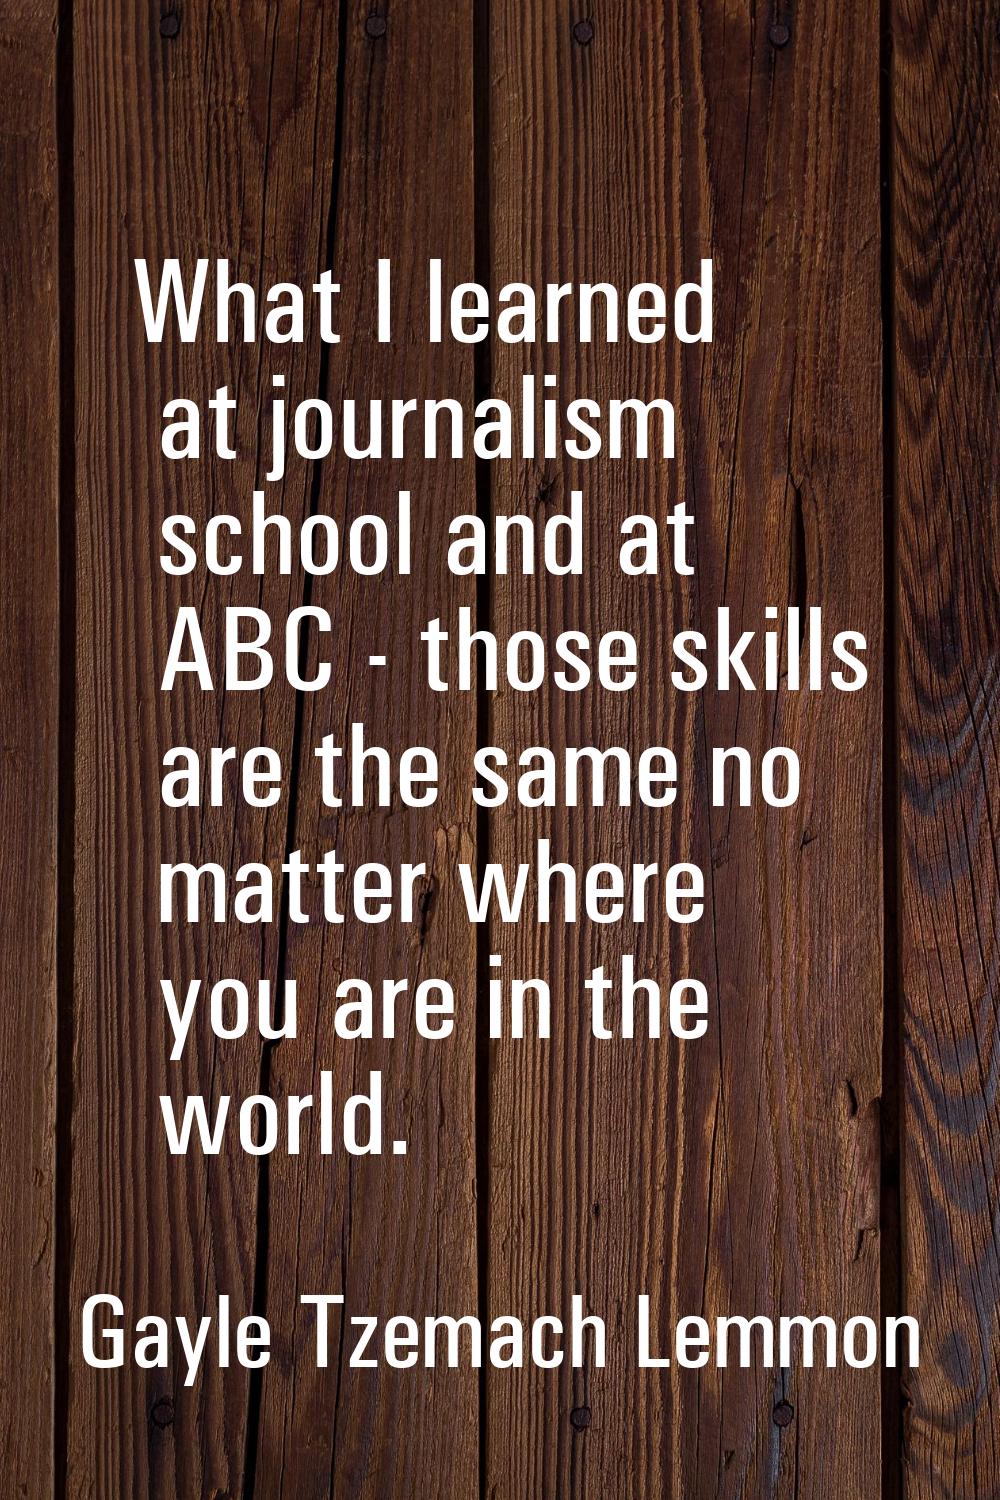 What I learned at journalism school and at ABC - those skills are the same no matter where you are 